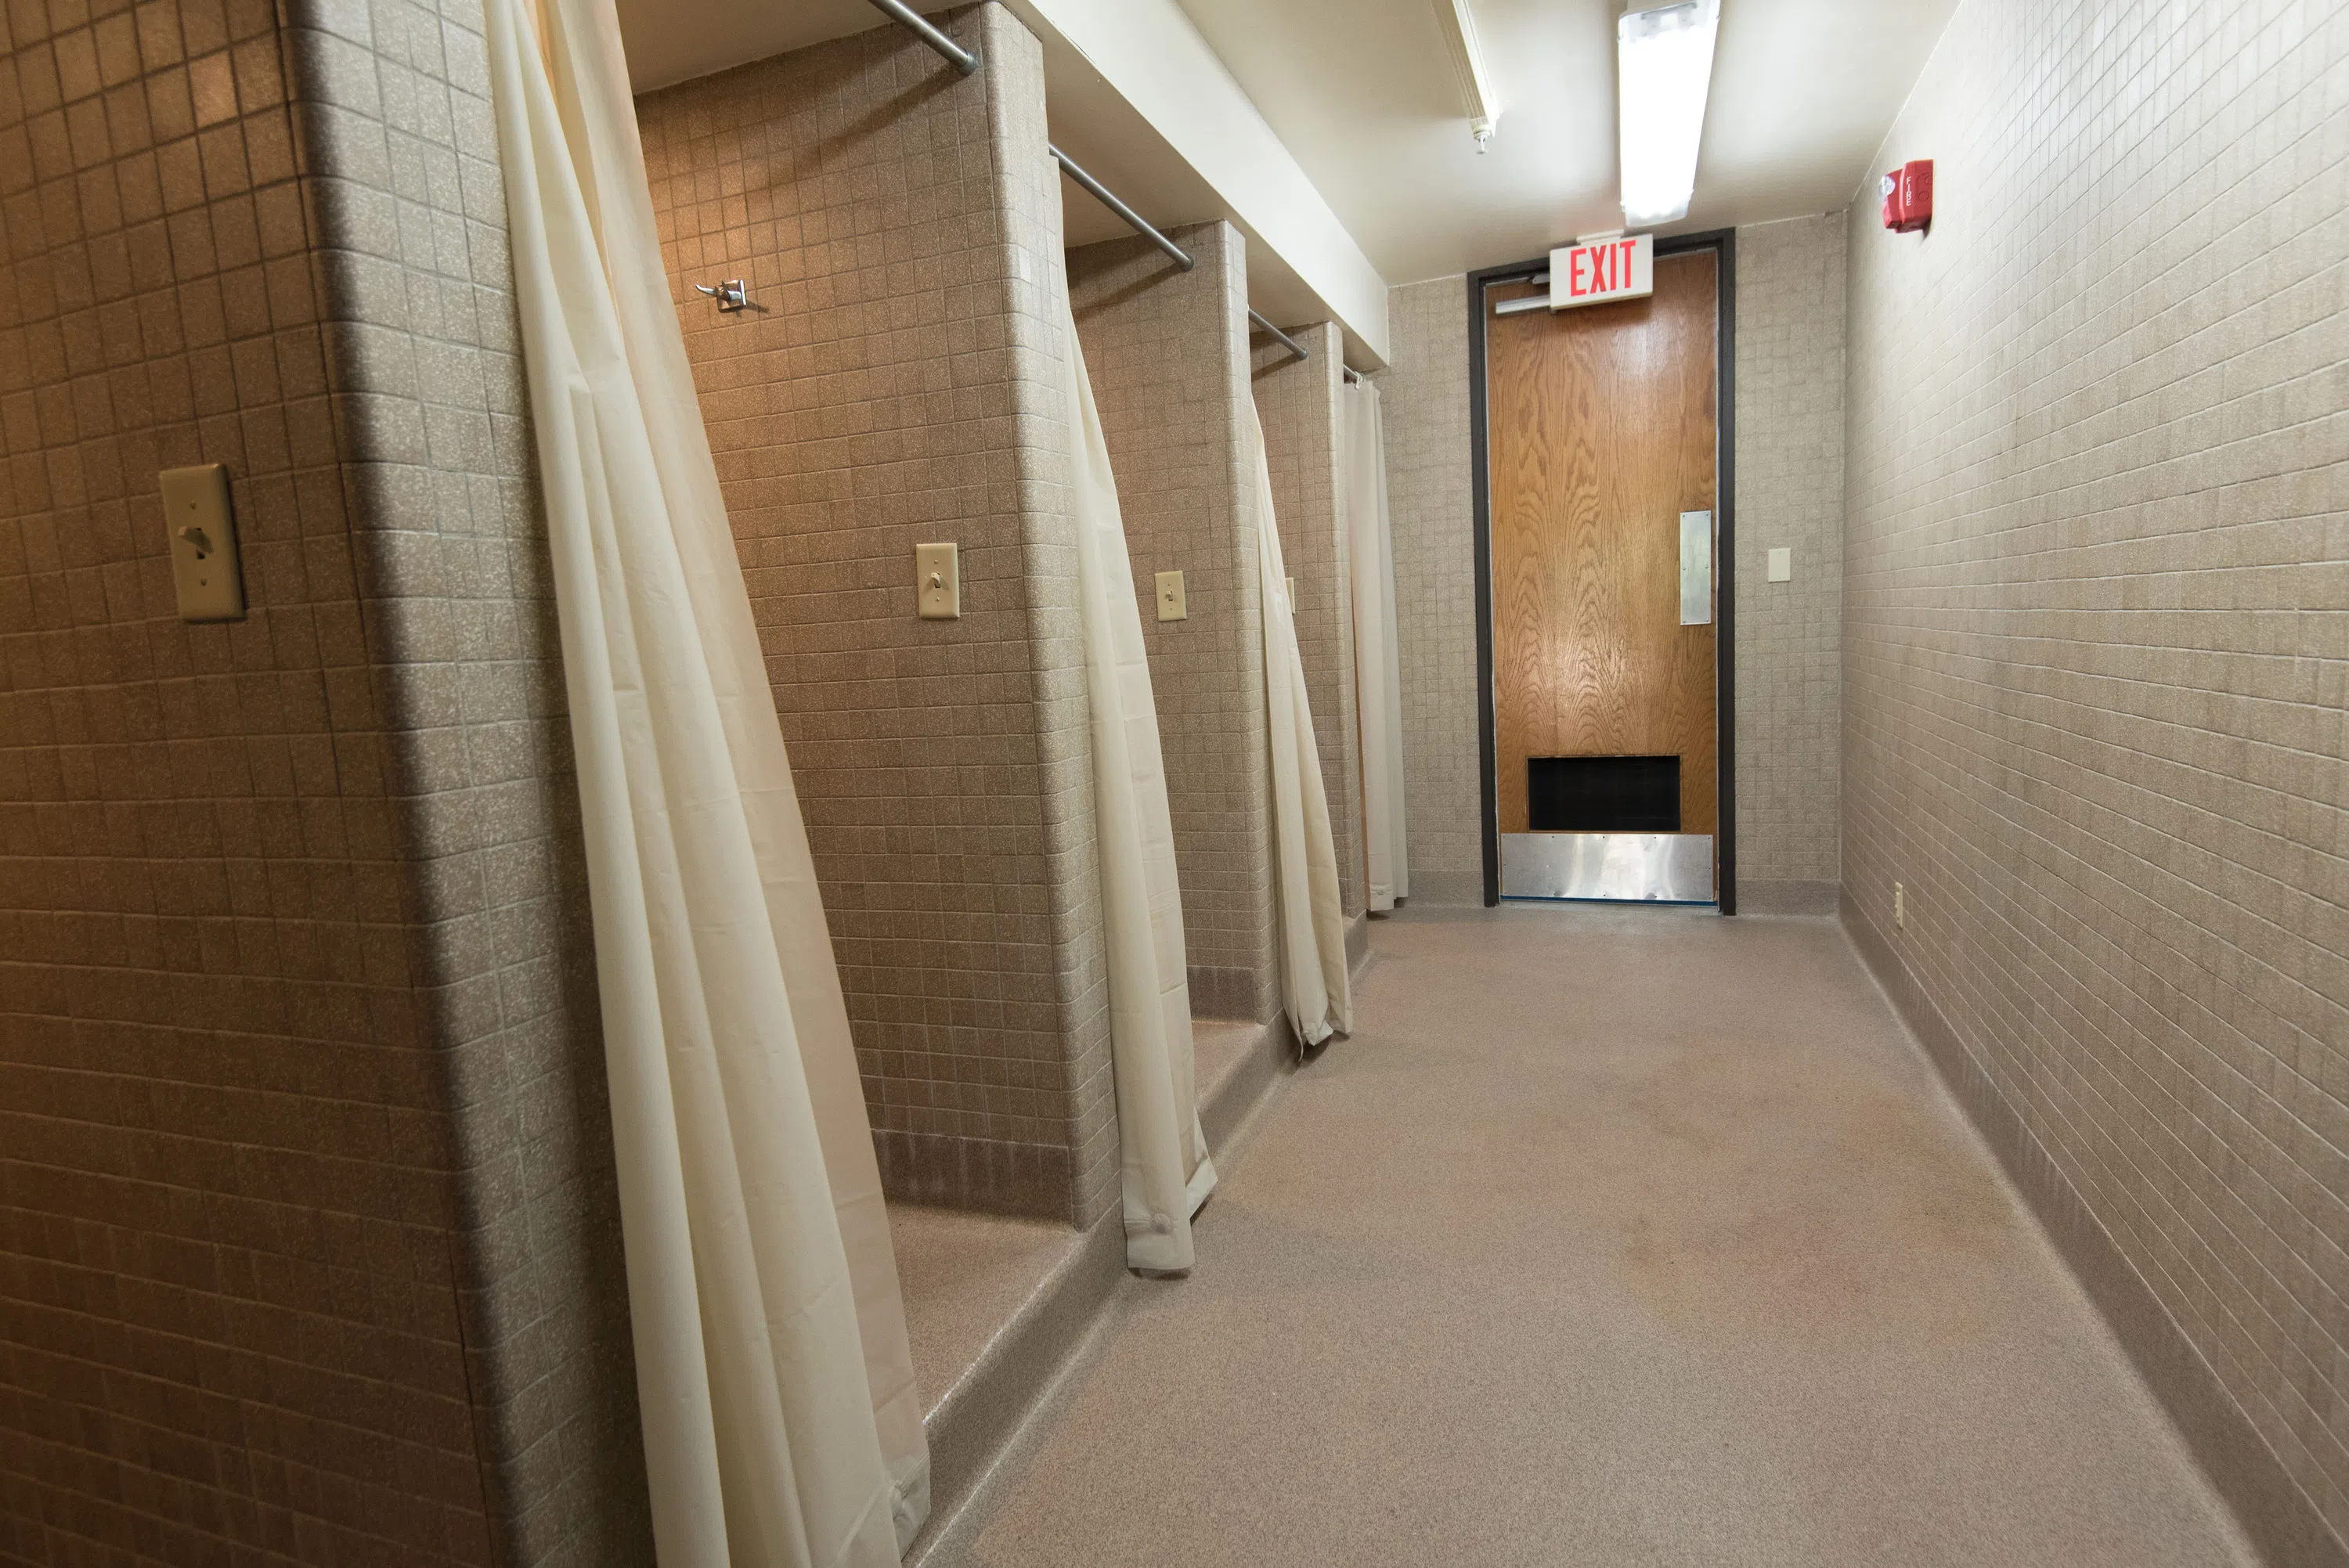 Each wing in Mouton Hall has a shower hall area. 